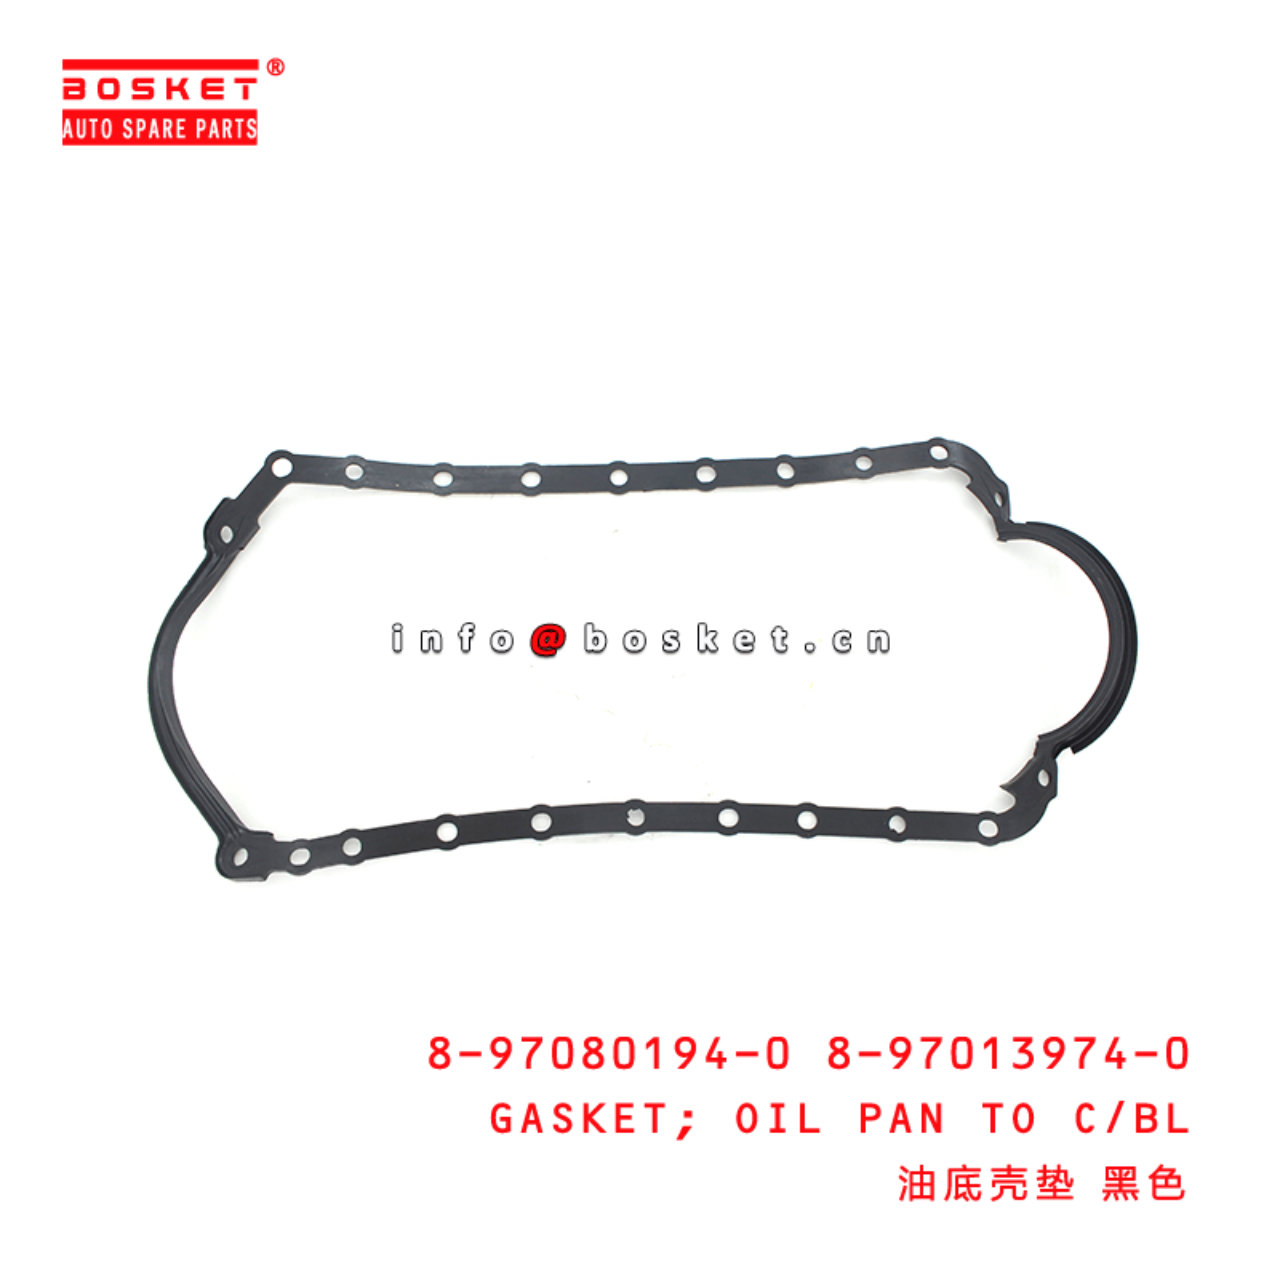 8-97080194-0 8-97013974-0 Oil Pan To Cylinder Block Gasket 8970801940 8970139740 Suitable for ISUZU 